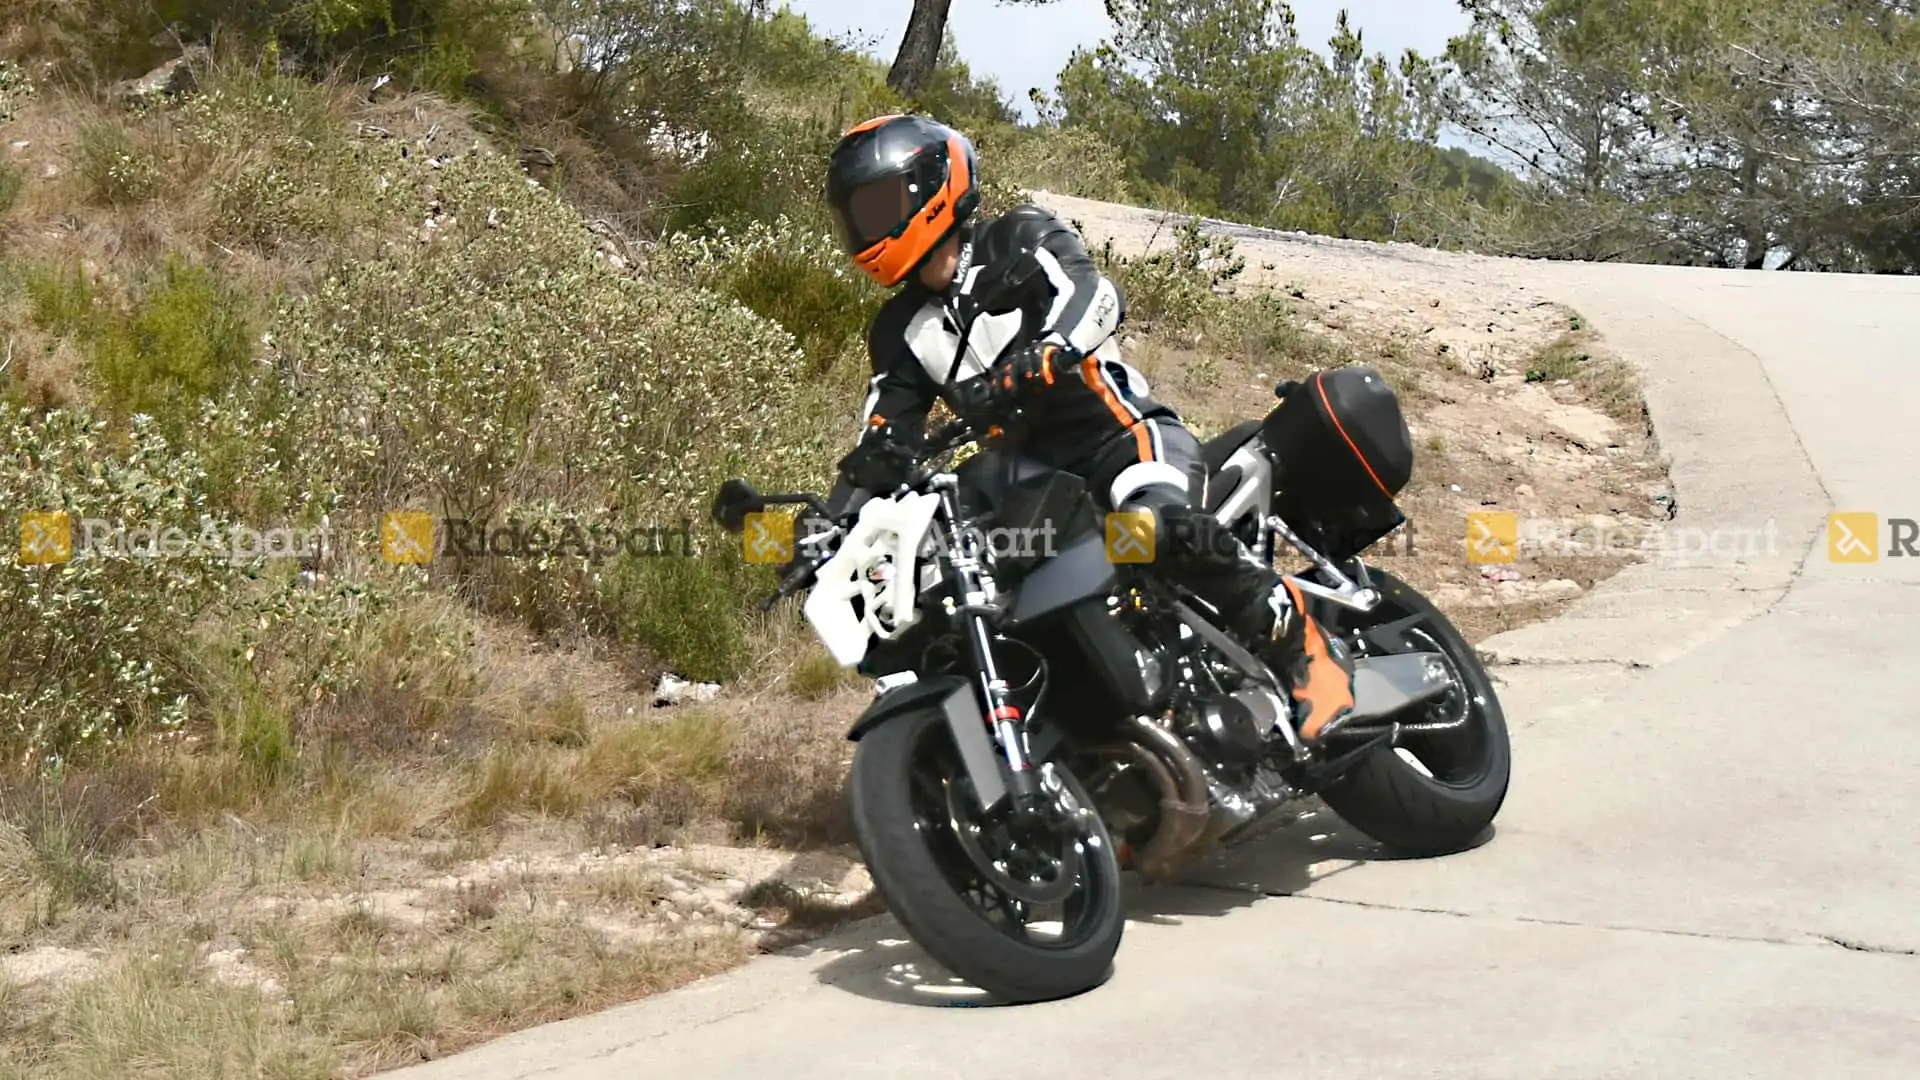 New KTM Duke 990 Spotted Testing - Coming To India? - angle